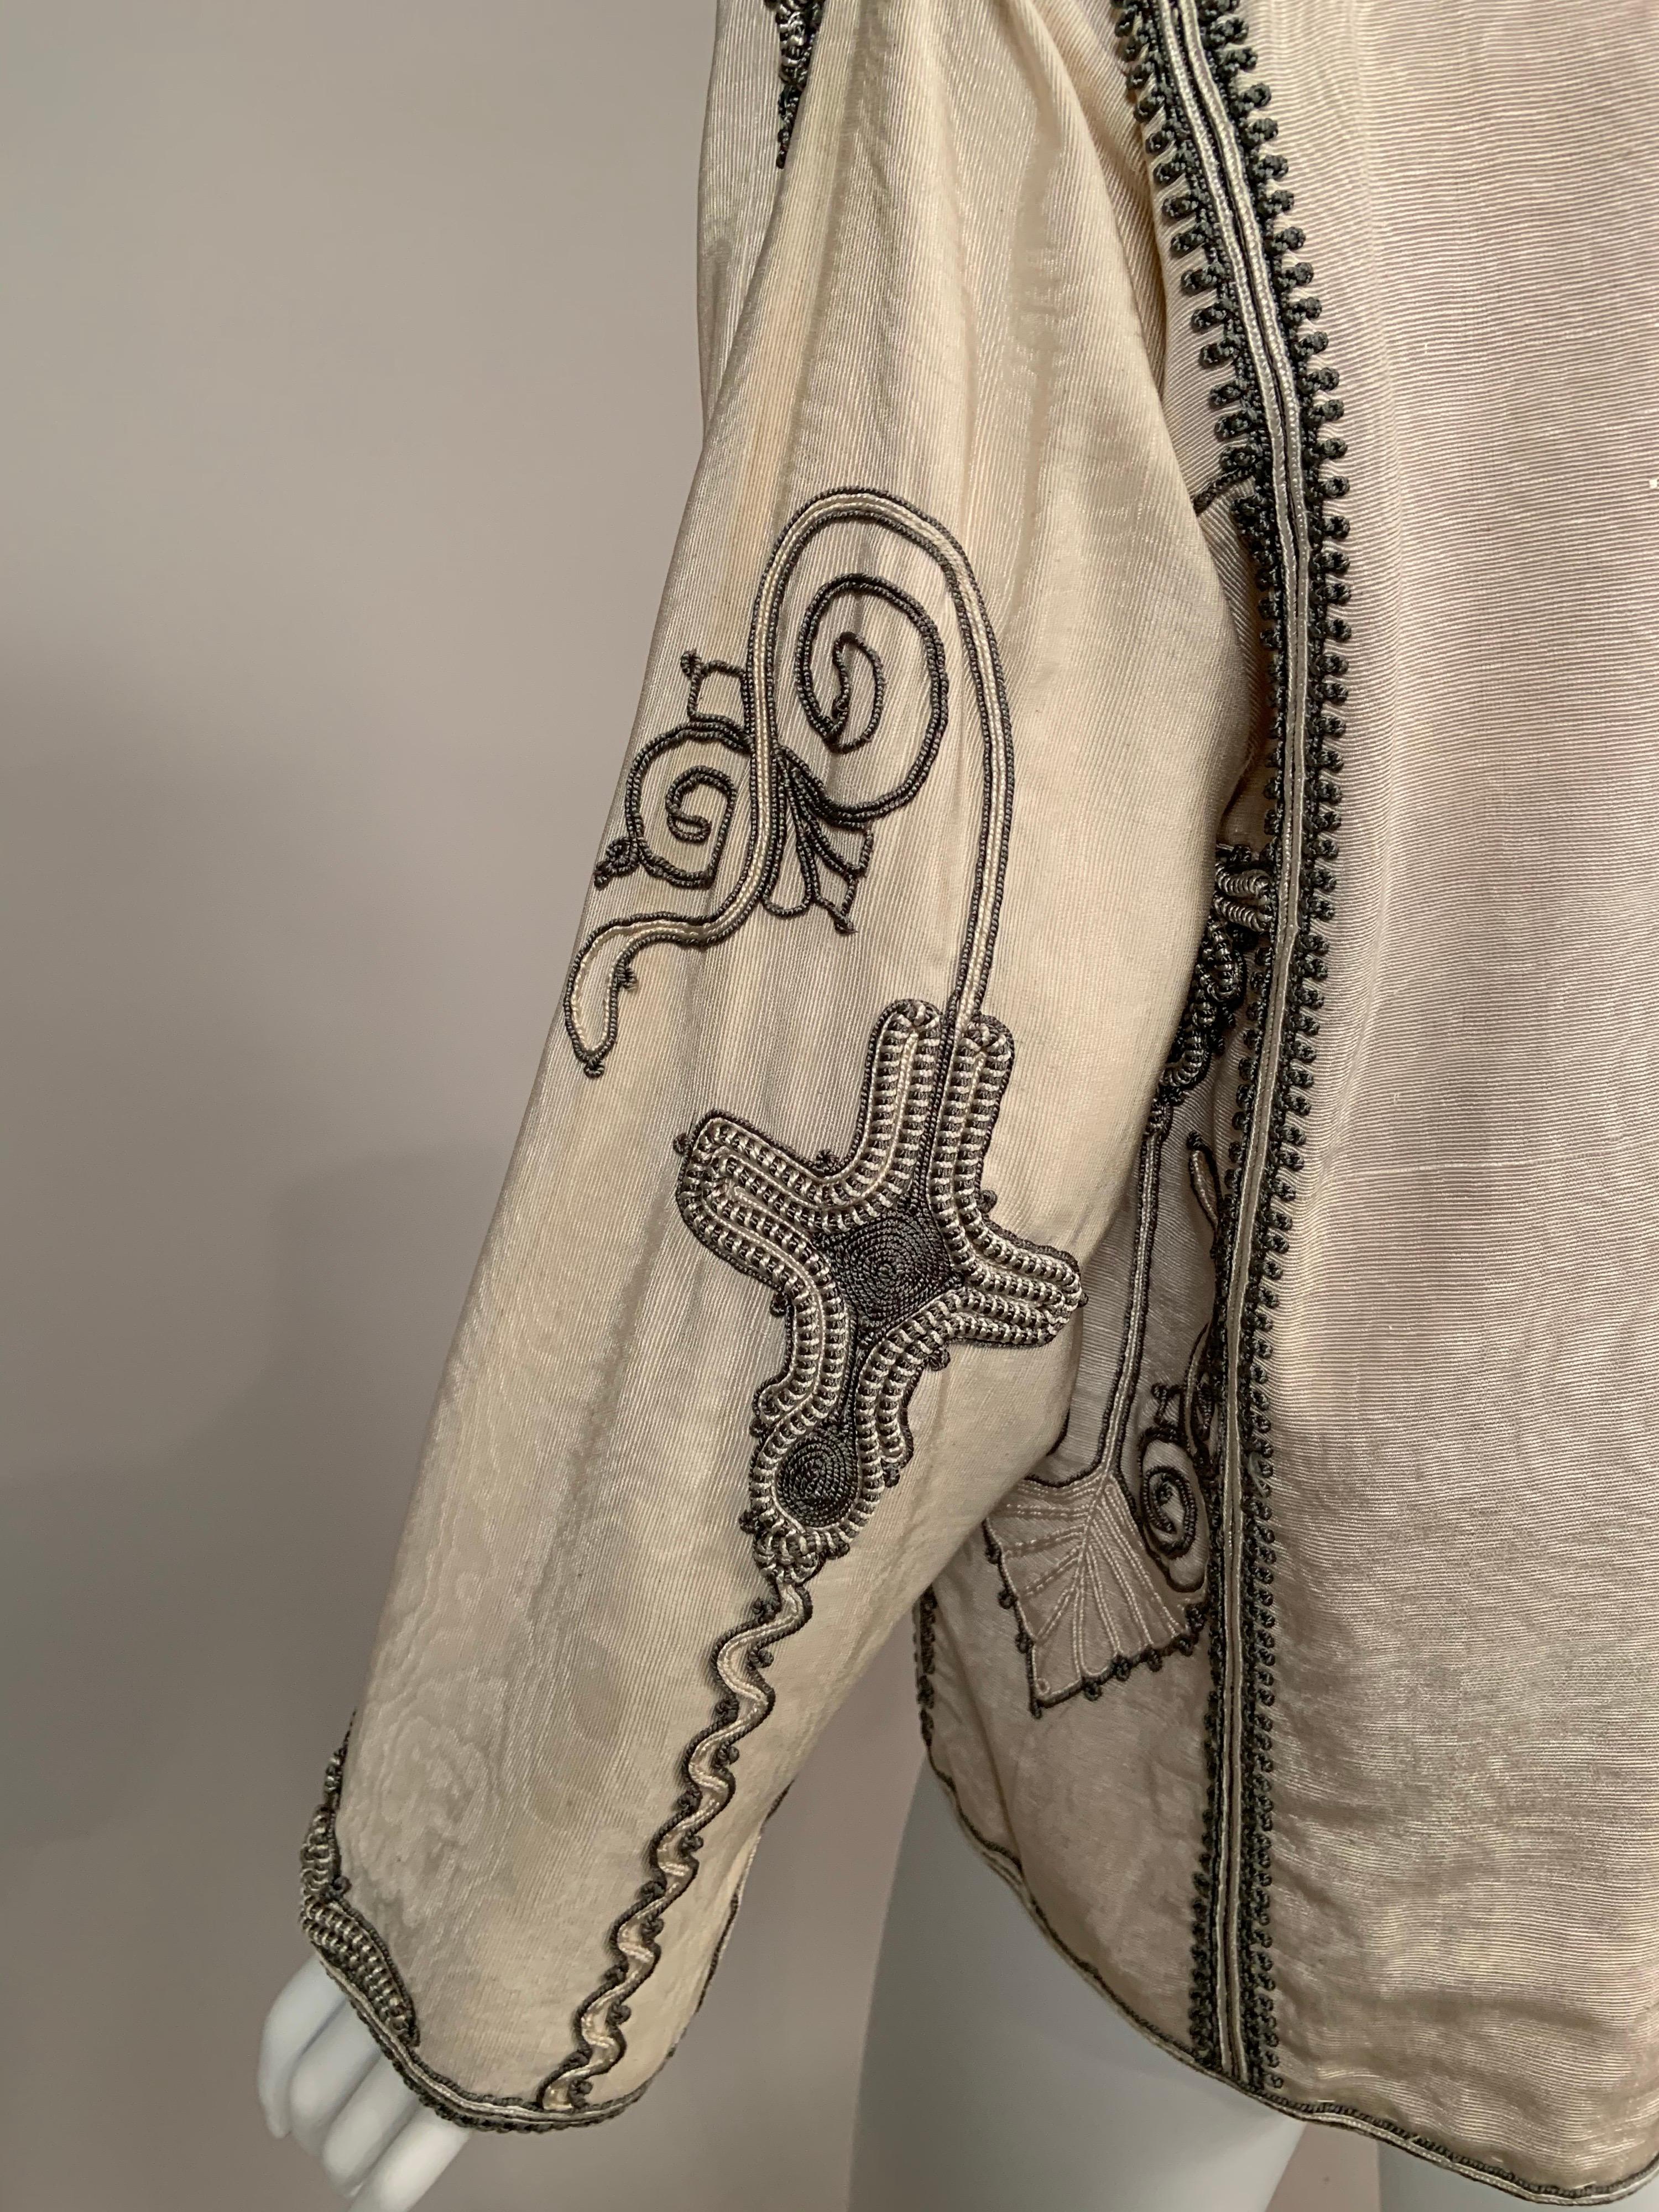 Moroccan Silk Jacket with Hand Sewn Charcoal Grey and Cream Soutache Braid Trim  6